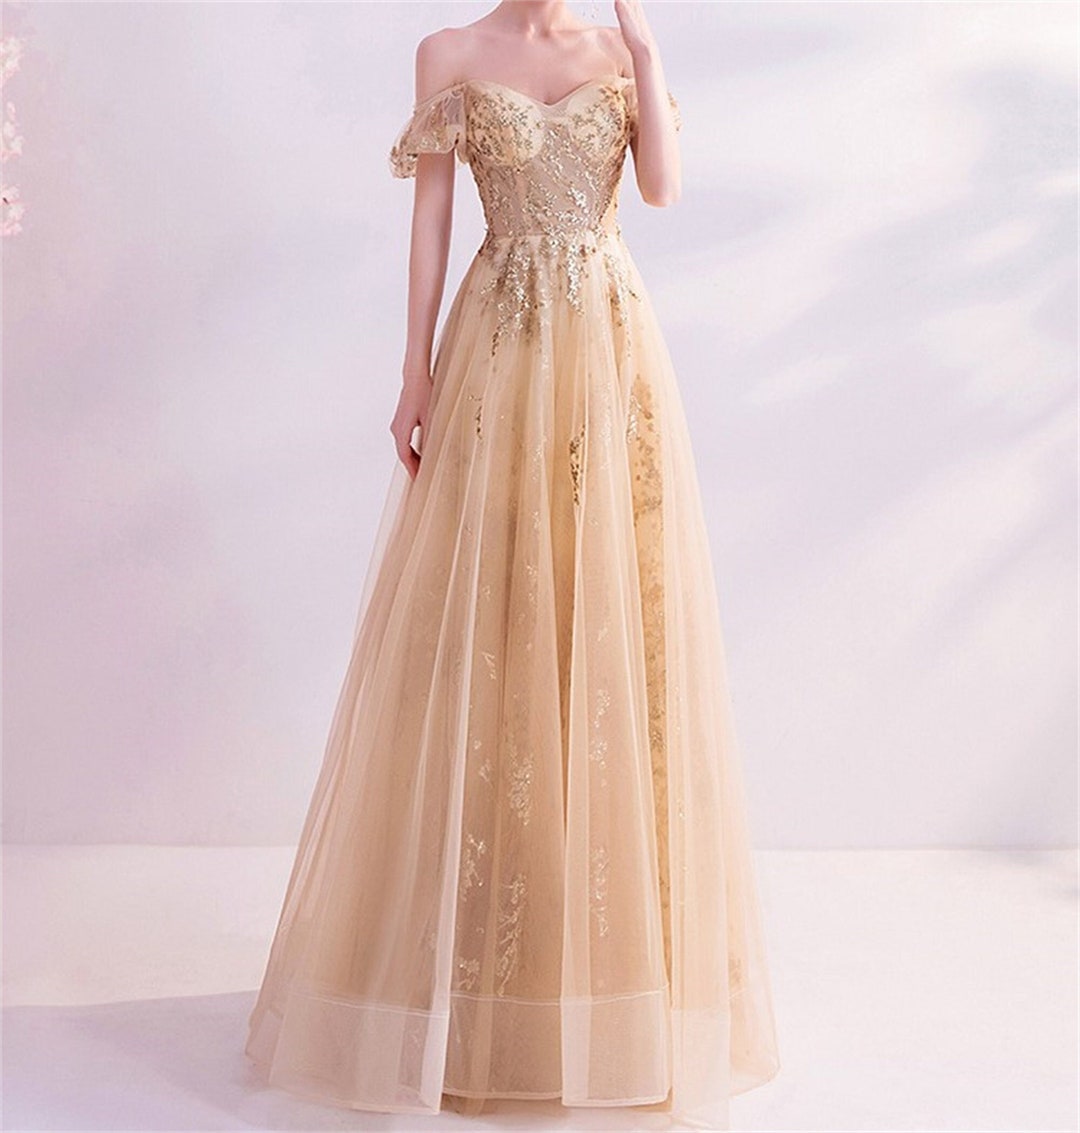 Gold Embroidered Prom Dress, Gold One Shoudler Prom Dress, Shiny Tube ...